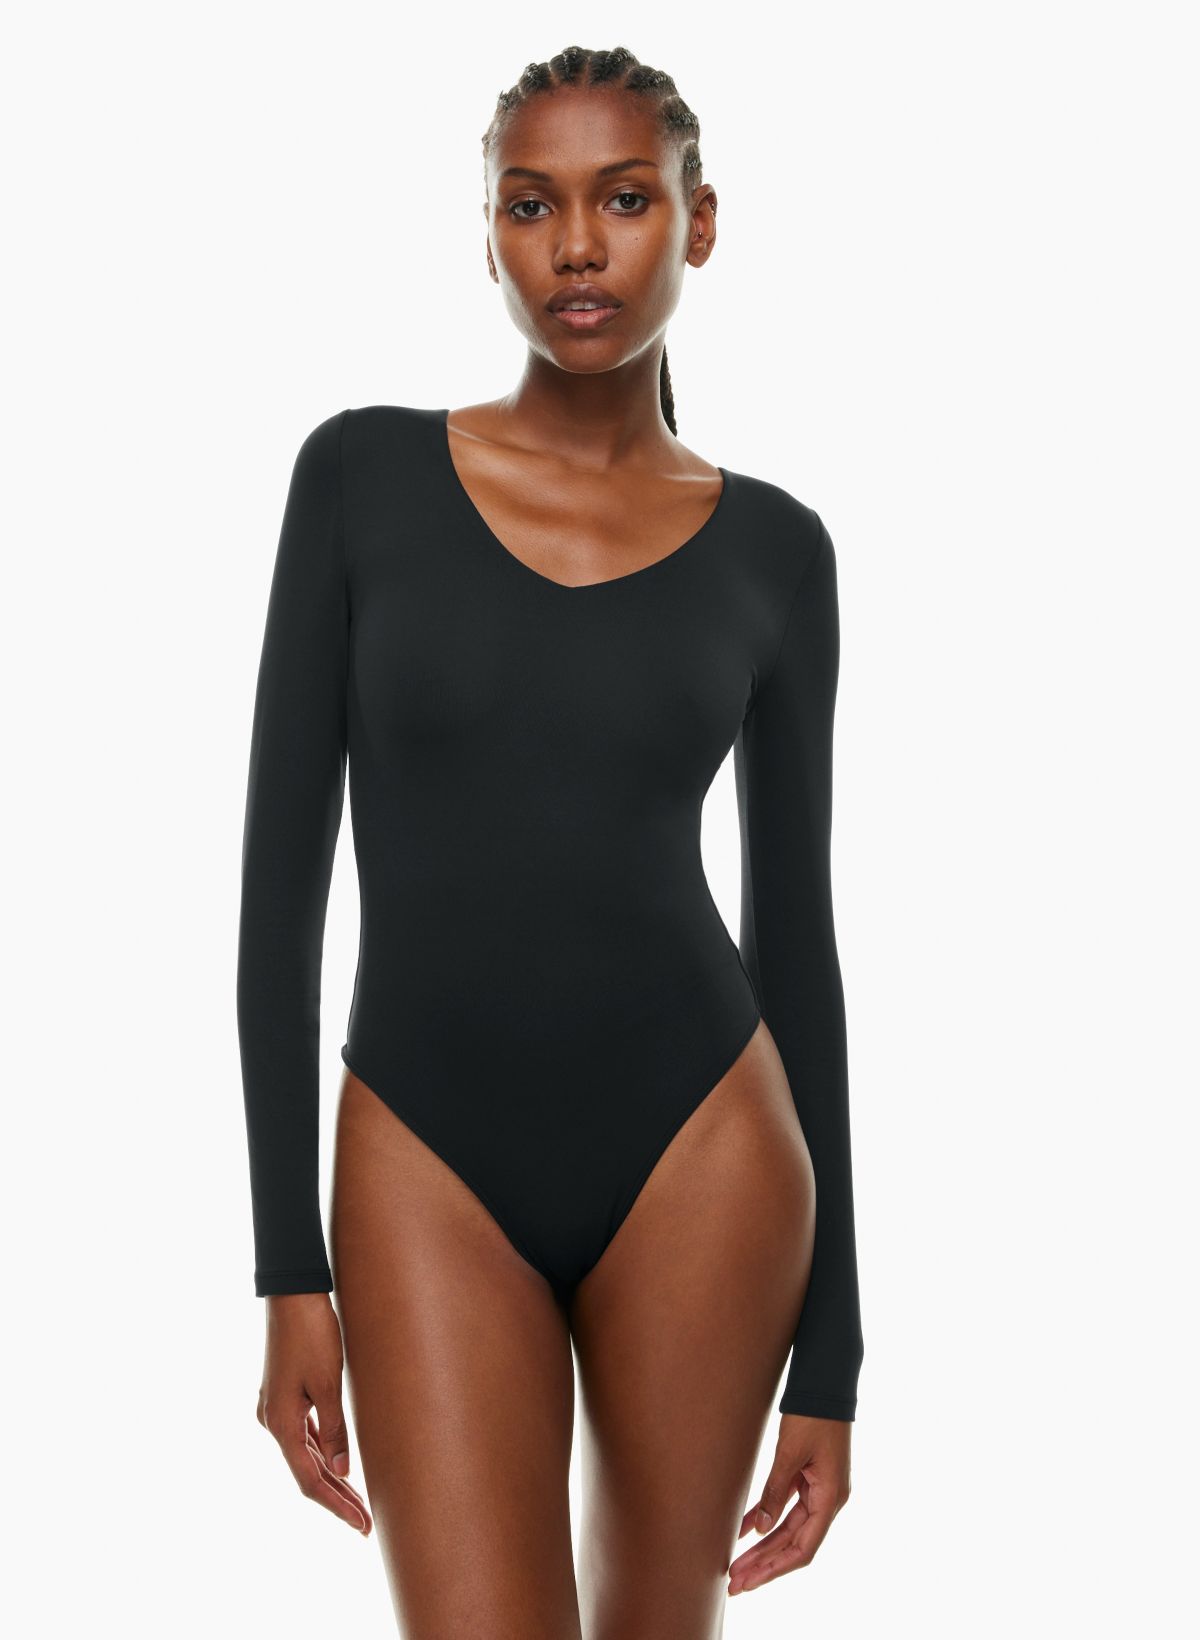 Bodysuit Bodysuits China Trade,Buy China Direct From Bodysuit Bodysuits  Factories at